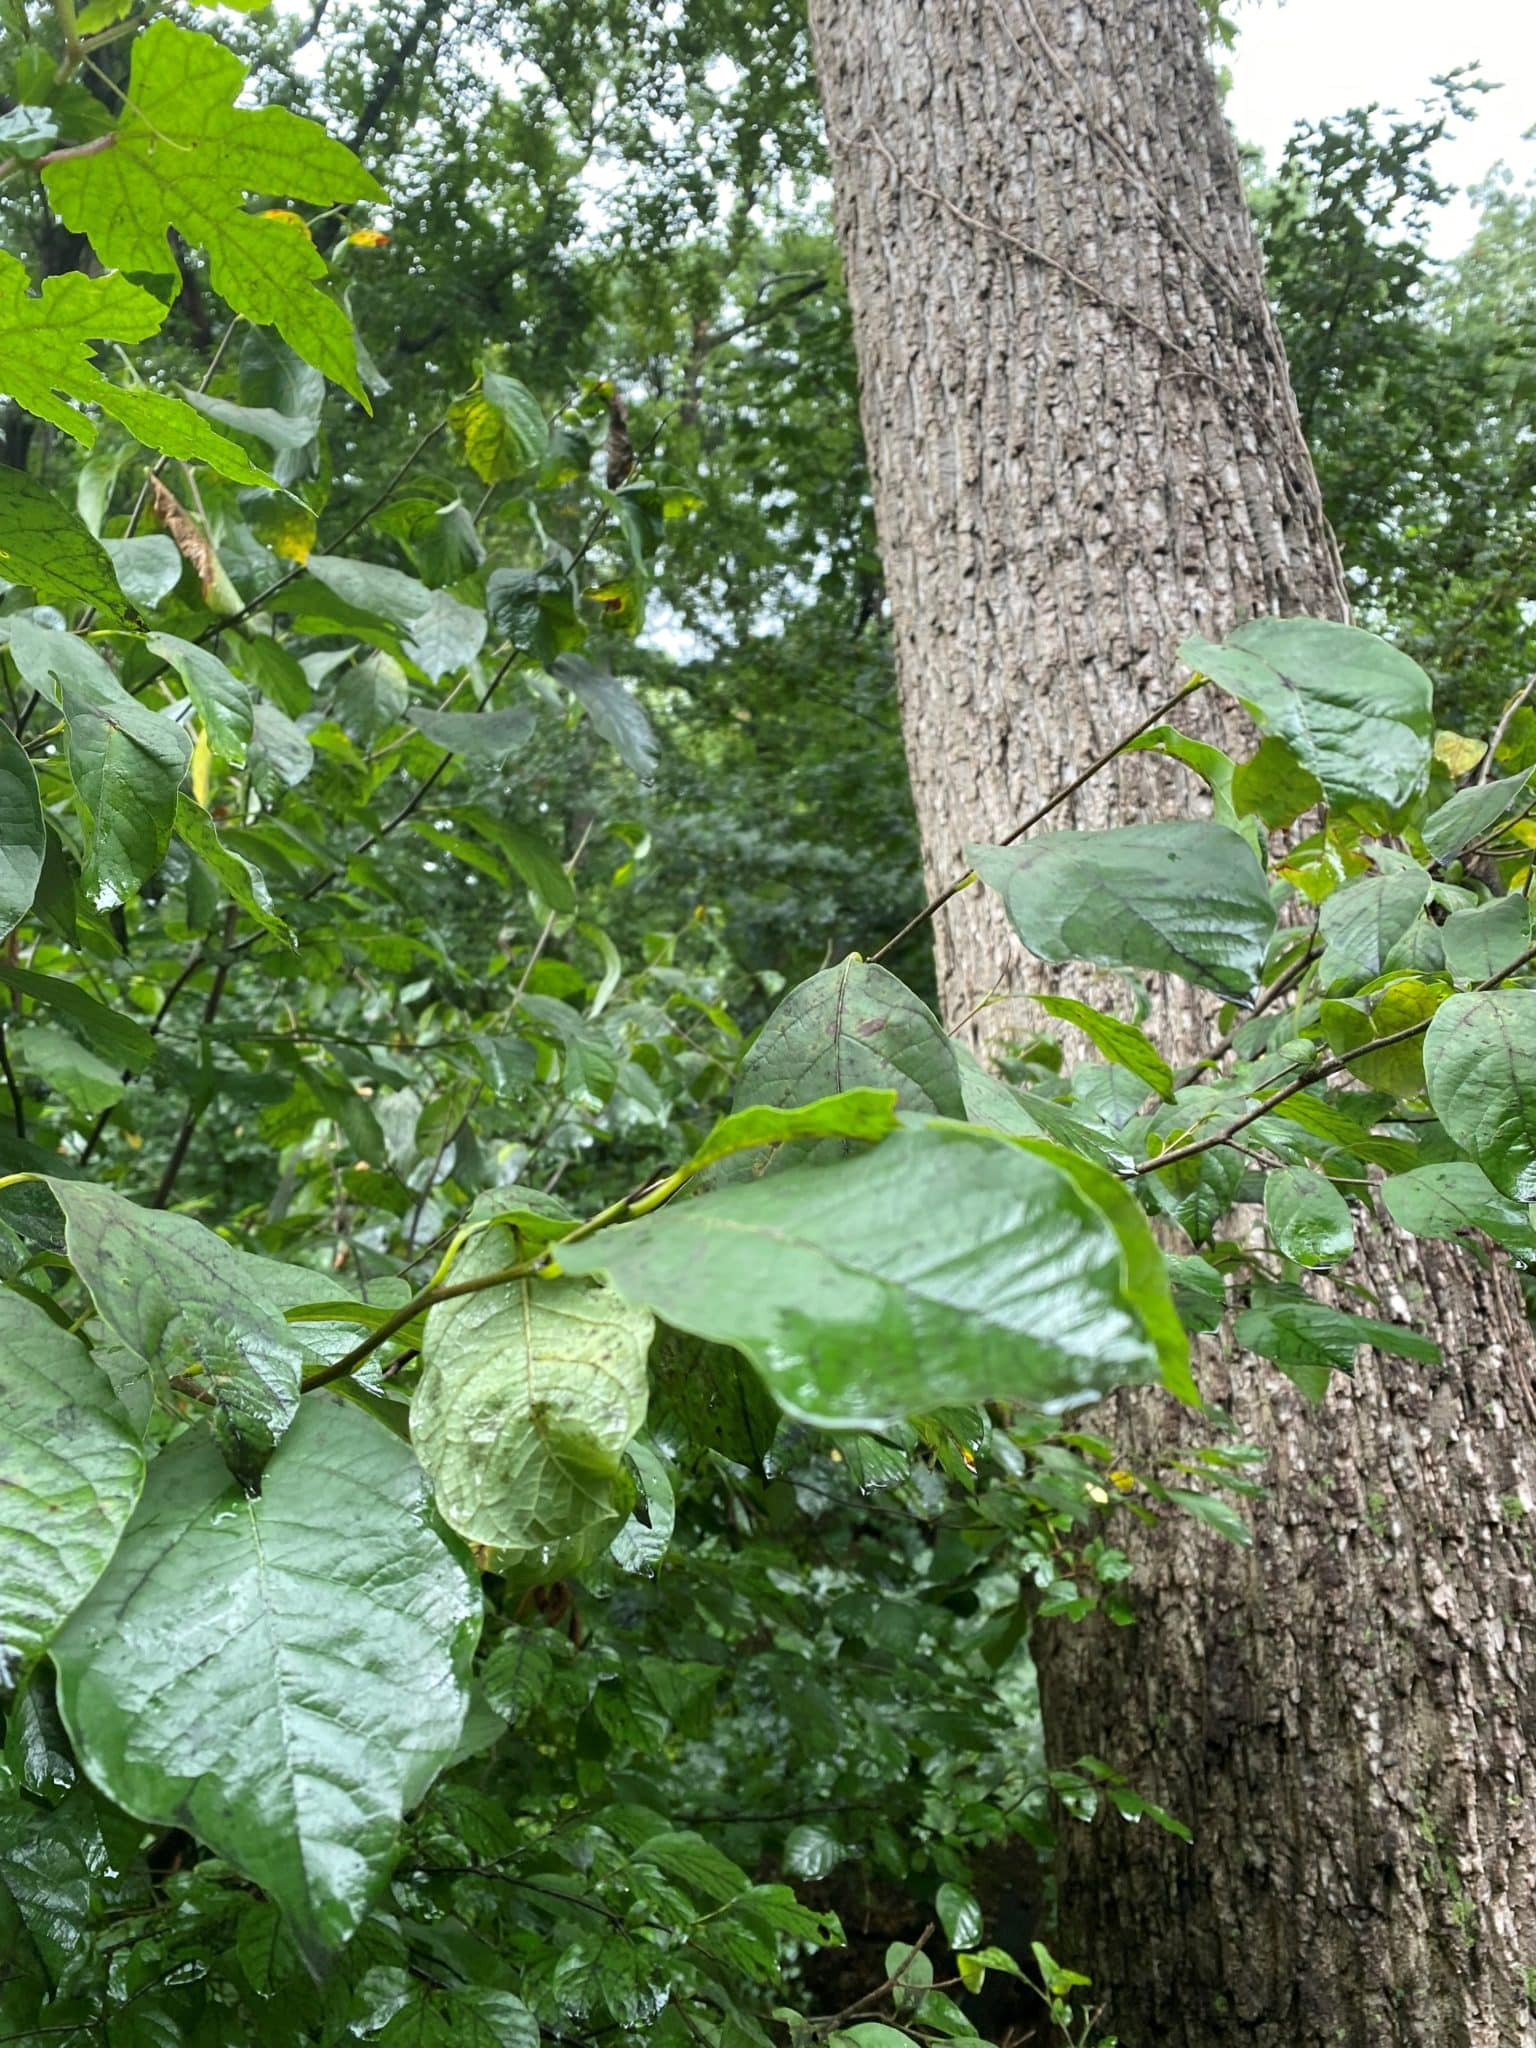 A Spicebush in Frick Park that will also provide highly nutritious berries to multiple bird species